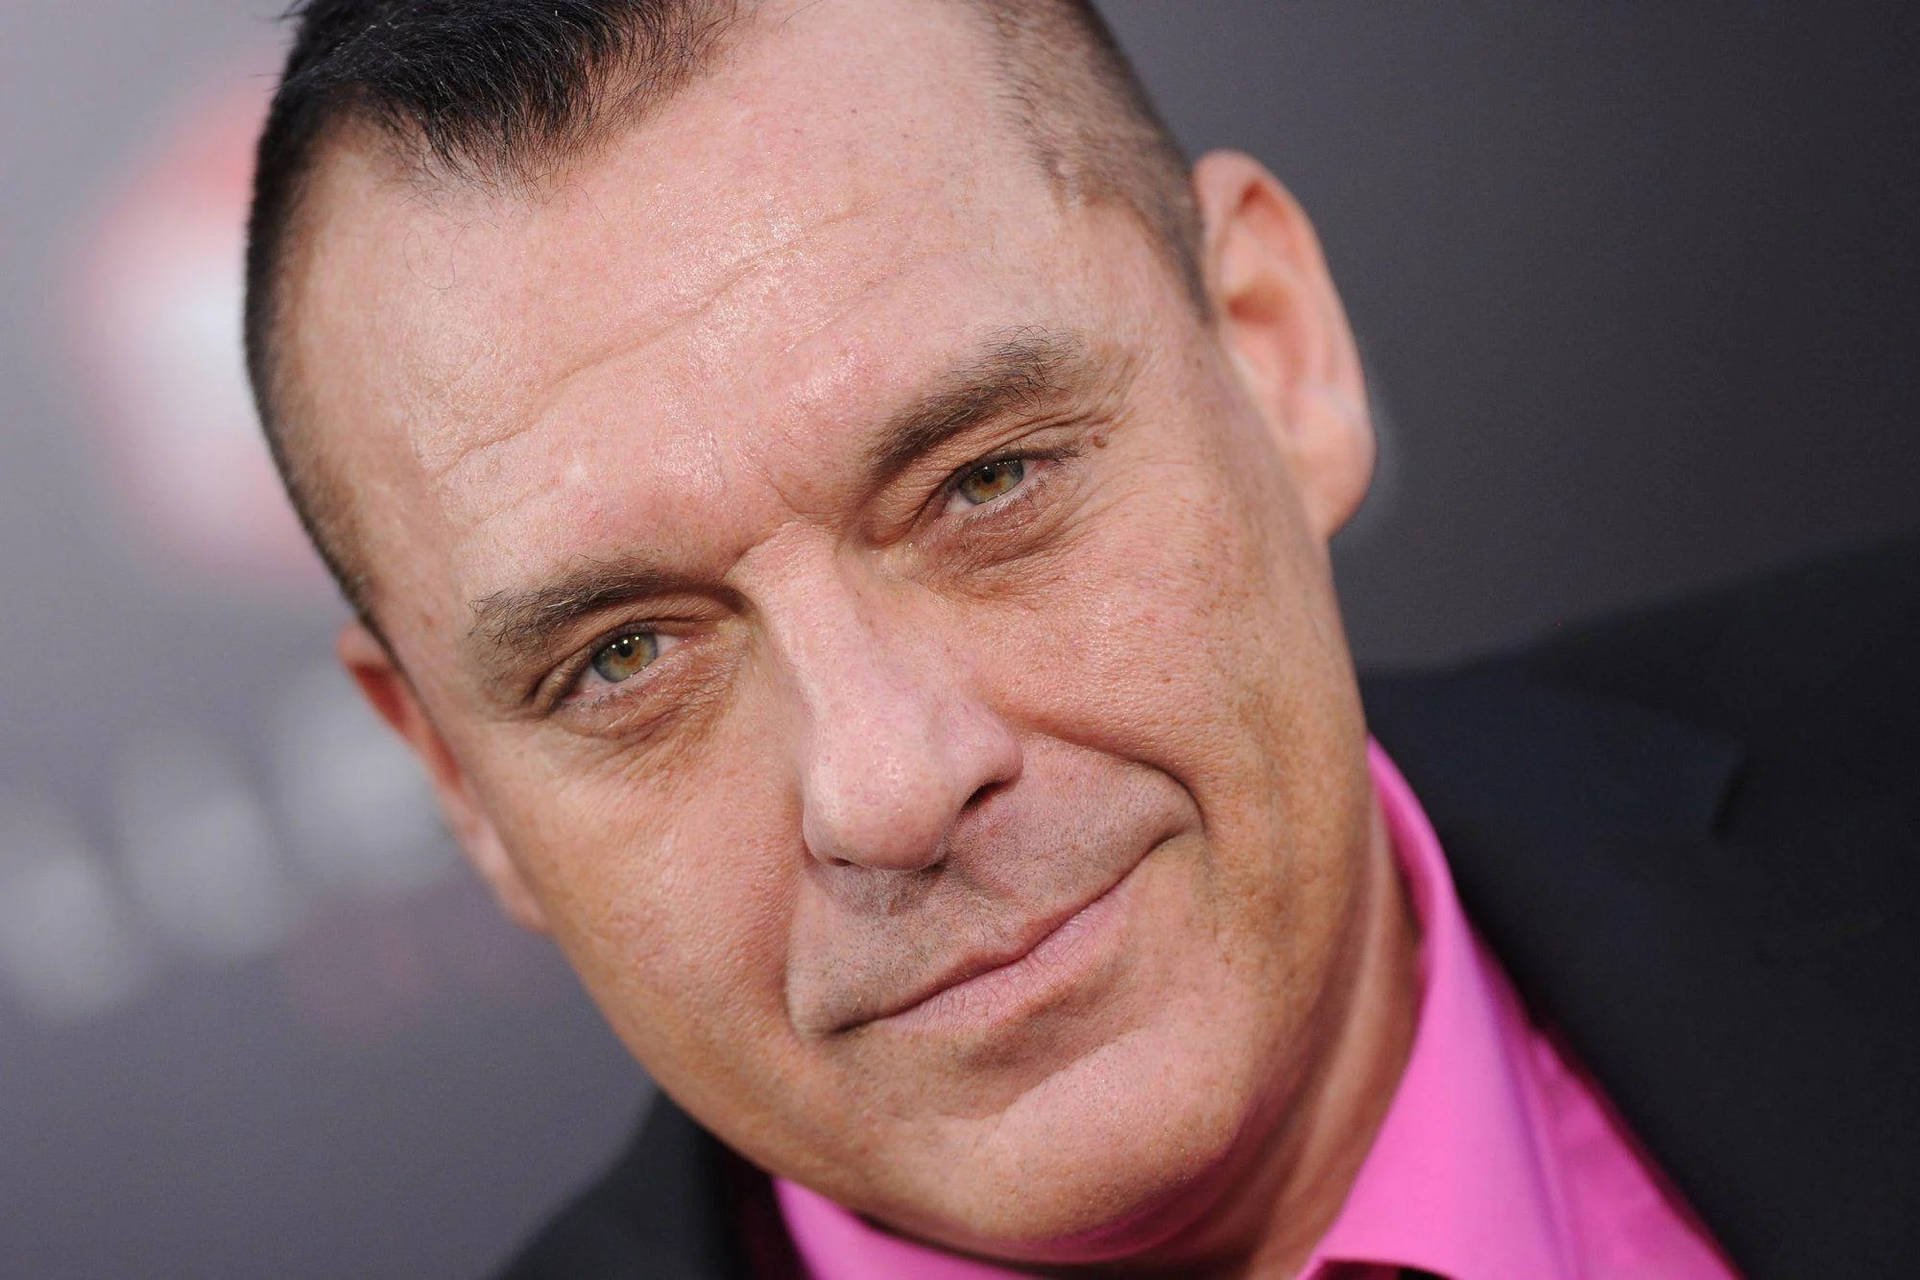 American Actor Tom Sizemore The Expendables 3 Premiere Wallpaper